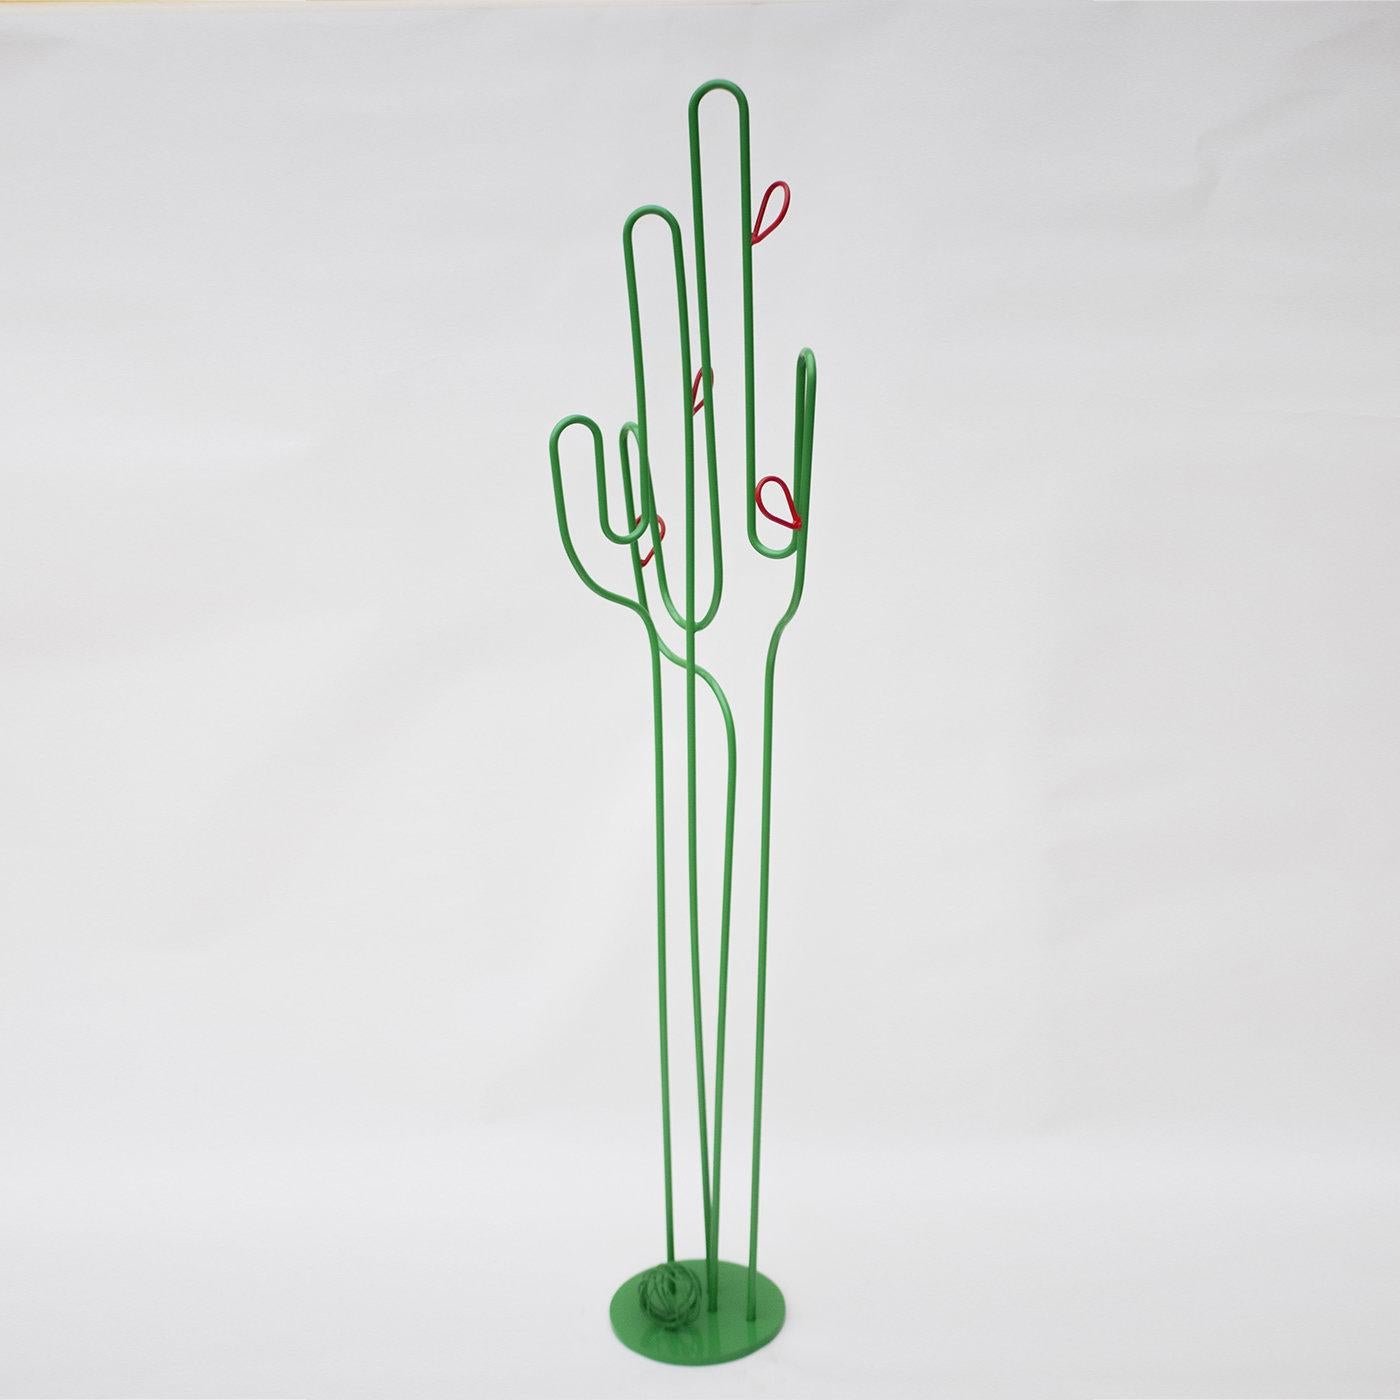 The artist conceived this vibrant piece of functional decor to simultaneously serve as contemporary sculpture and fancy coat rack. Crafted by hand from wrought iron, it flaunts a graceful and airy profile inspired by cactuses. A round base stands as